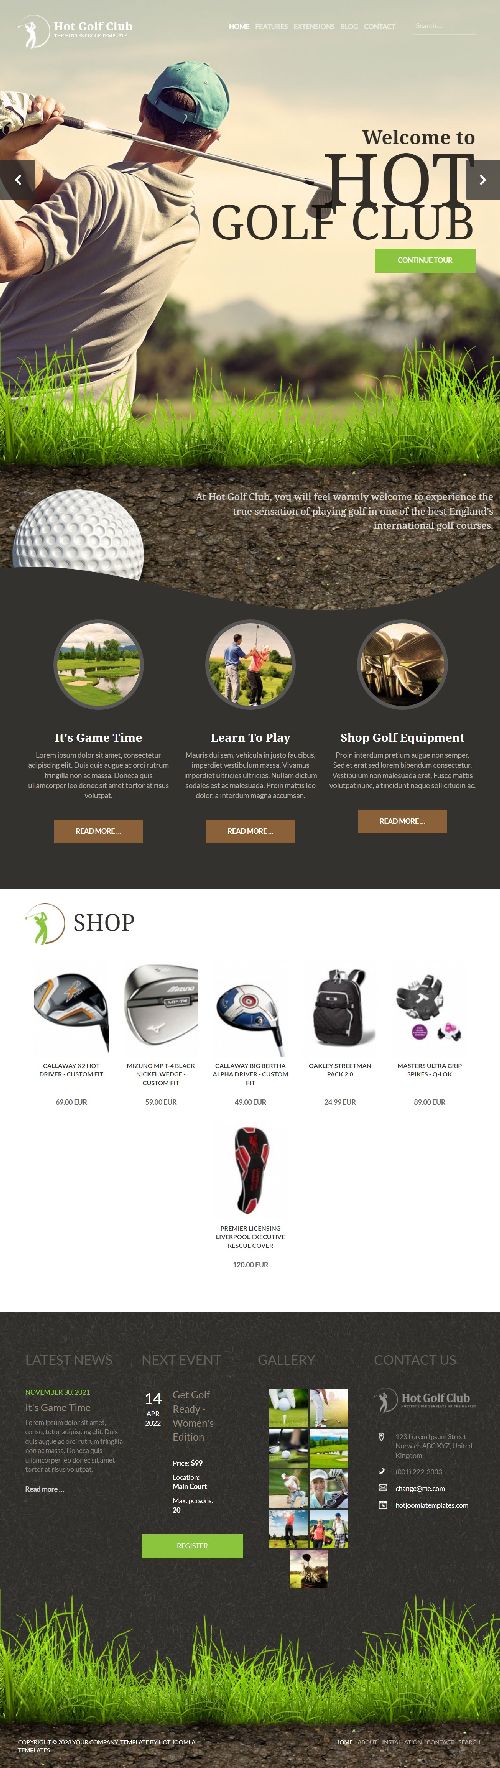 Golf - Joomla 4 Template for Websites Related to Golf